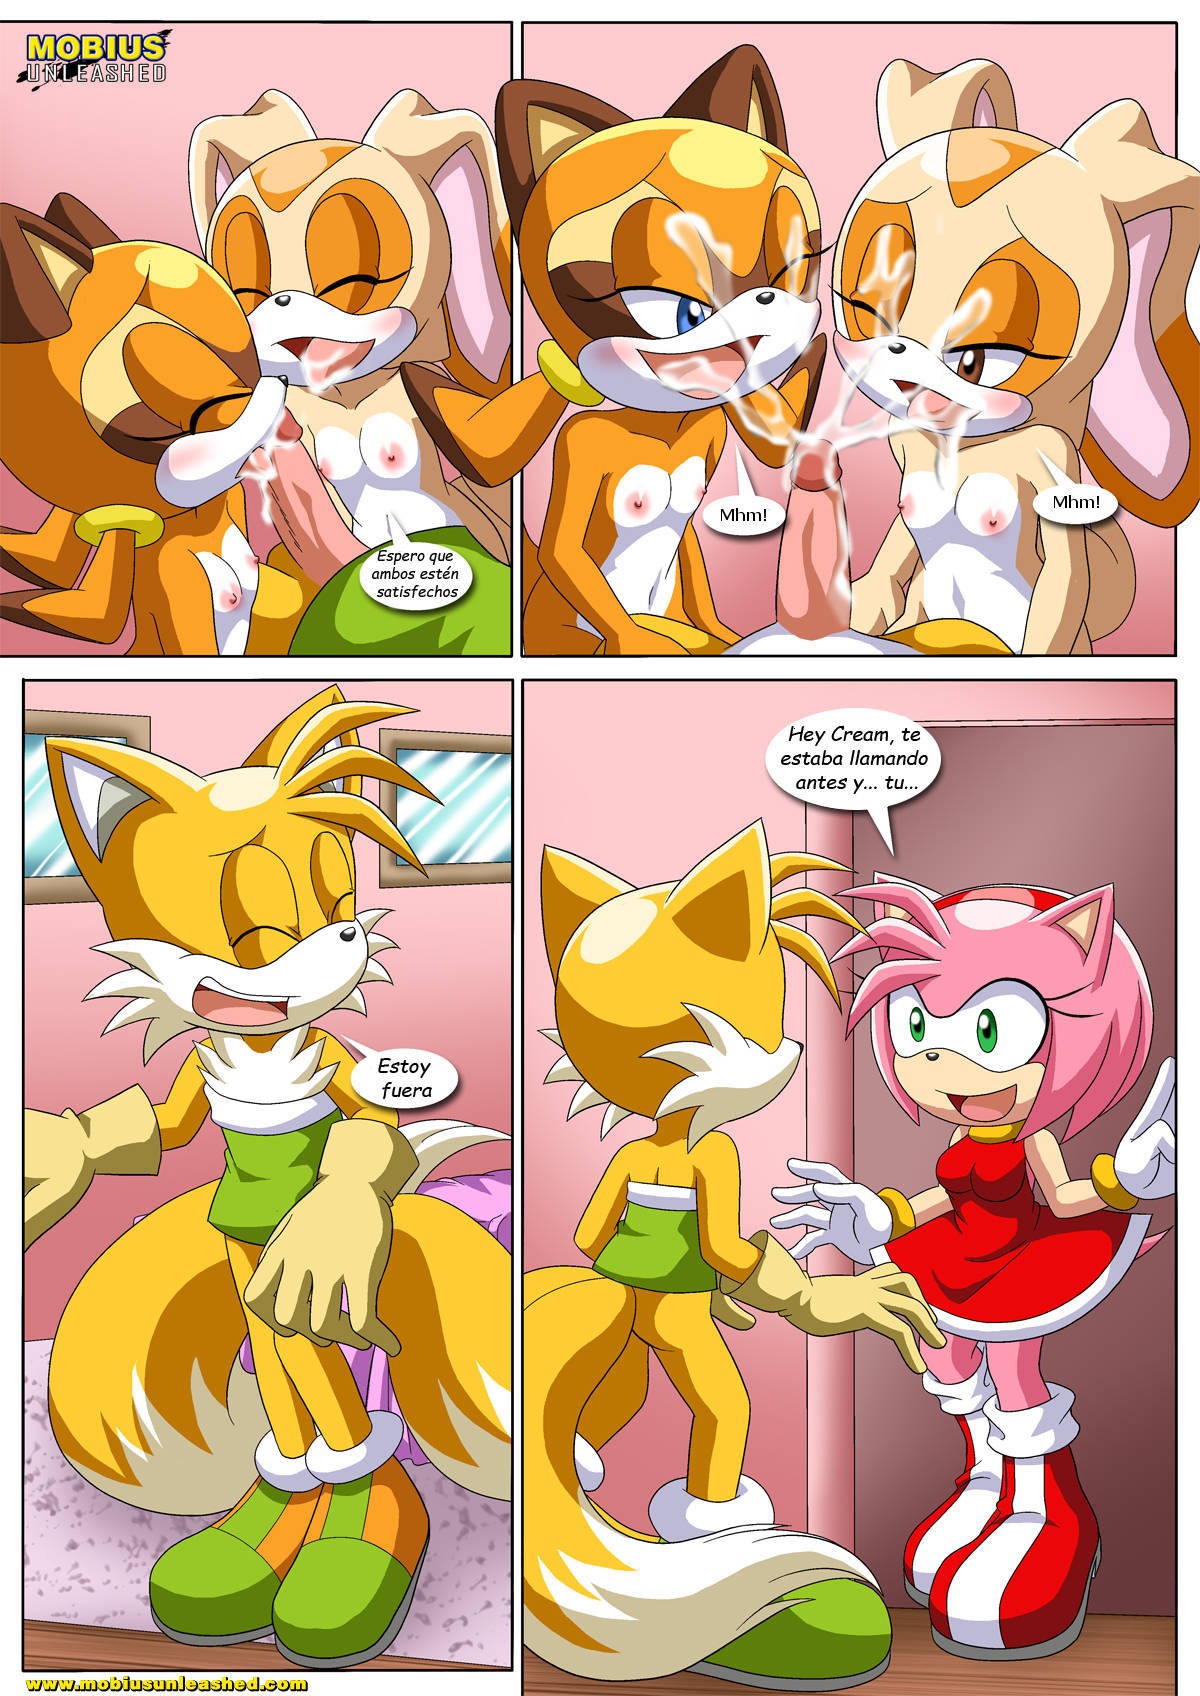 Rouge x tails